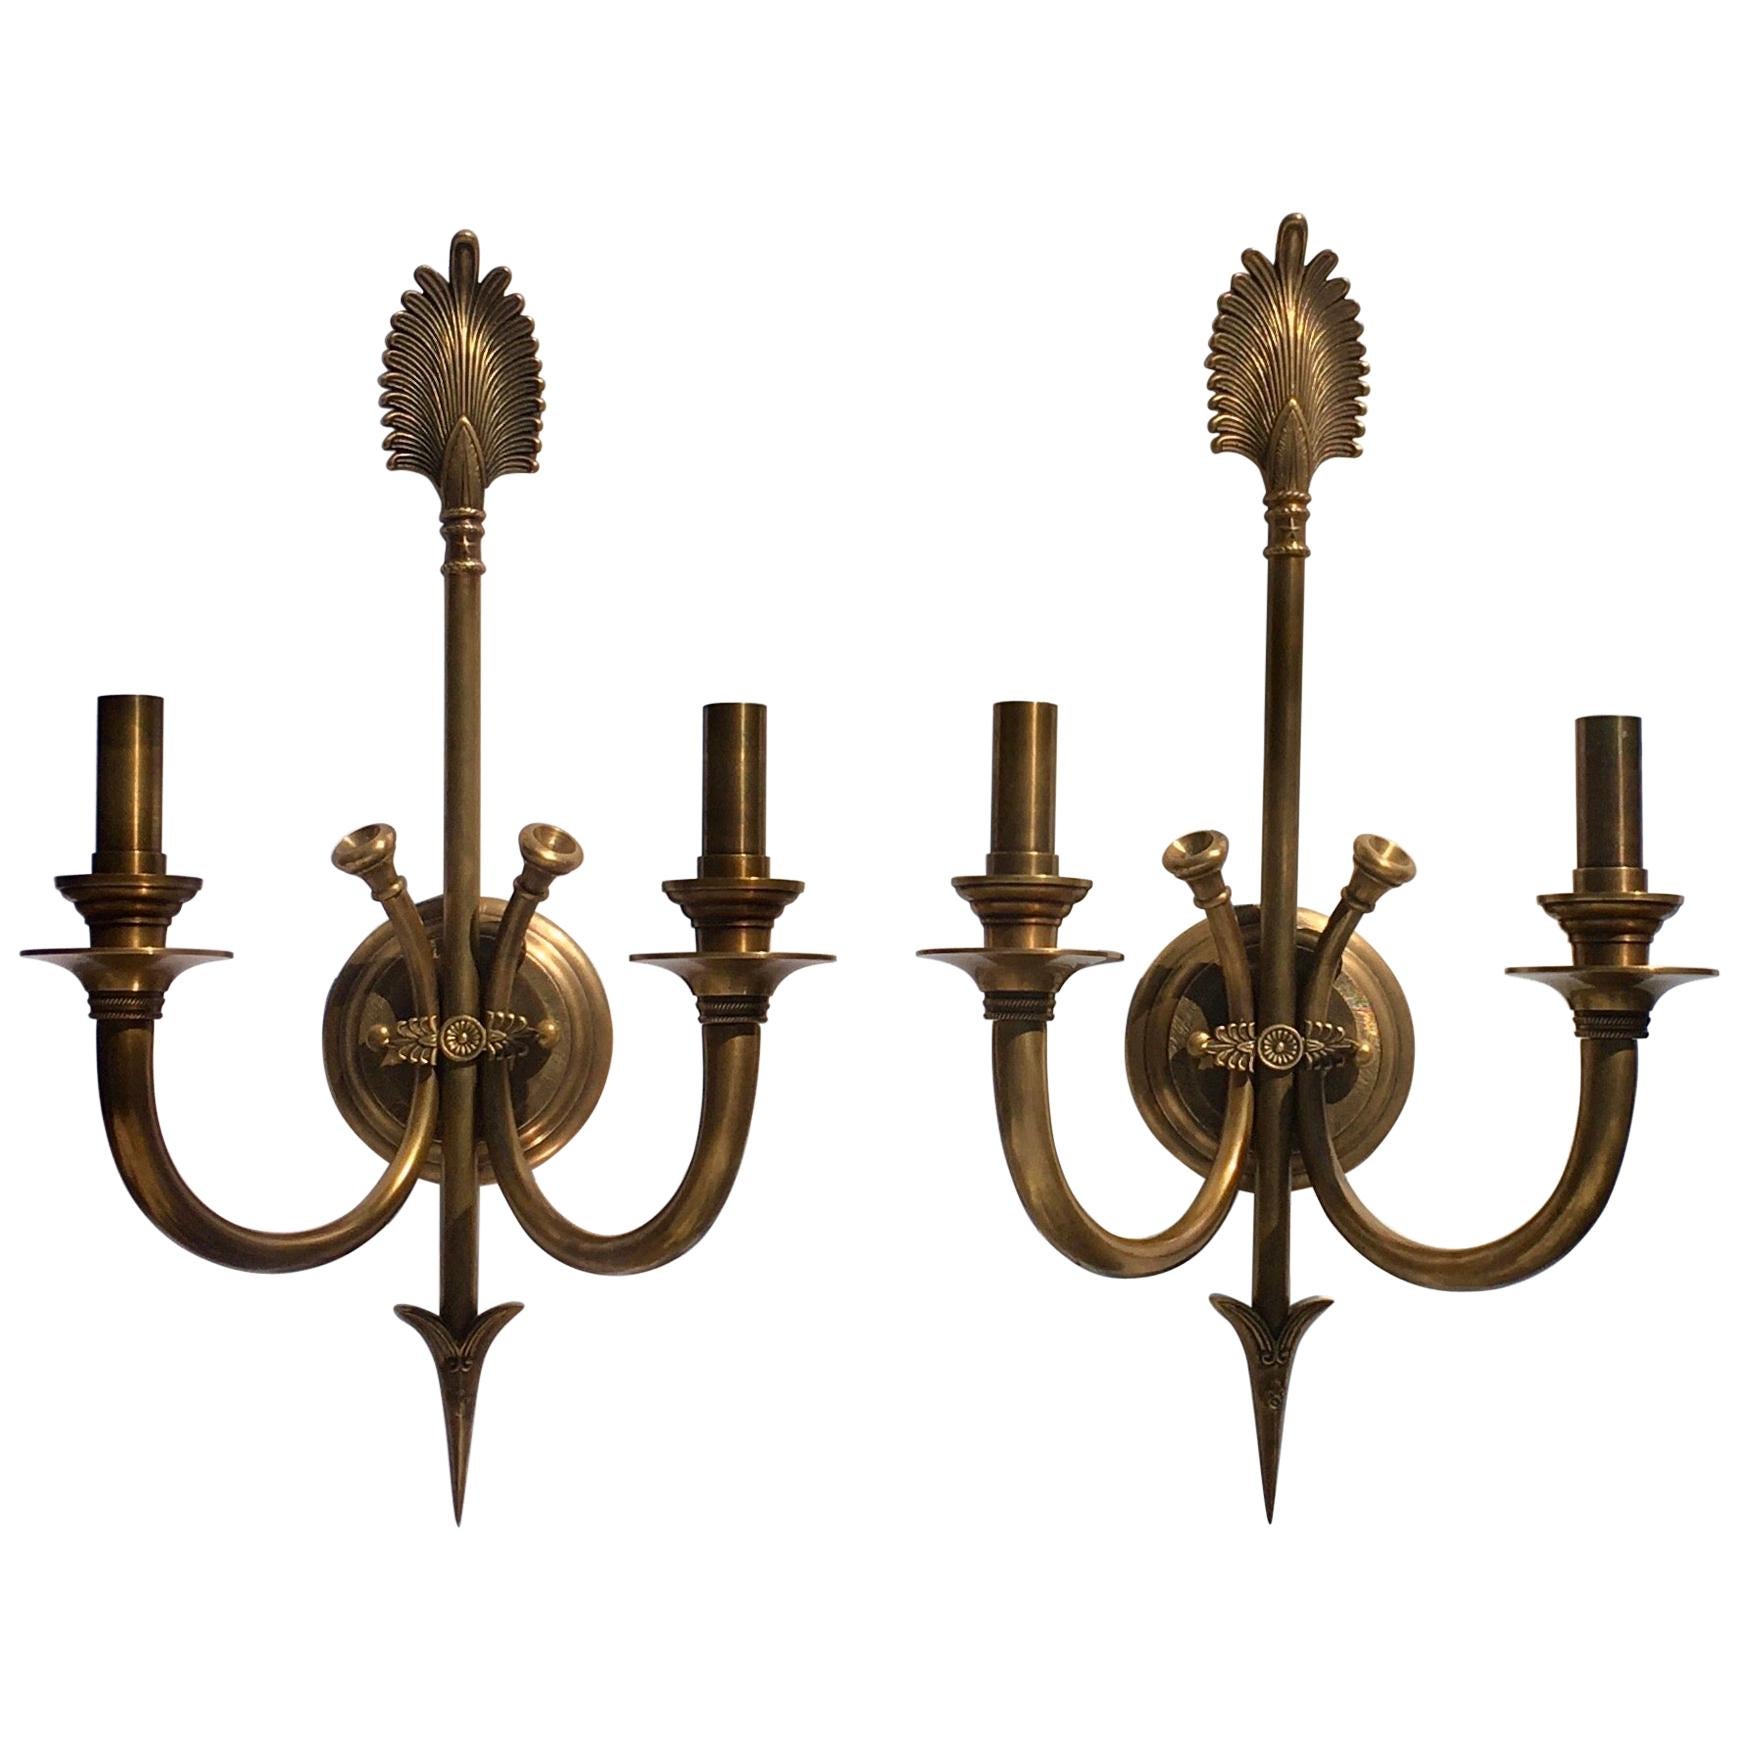 Bunny Williams Vintage Brass Plume and Arrow Classic Wall Sconce Lights, Pair